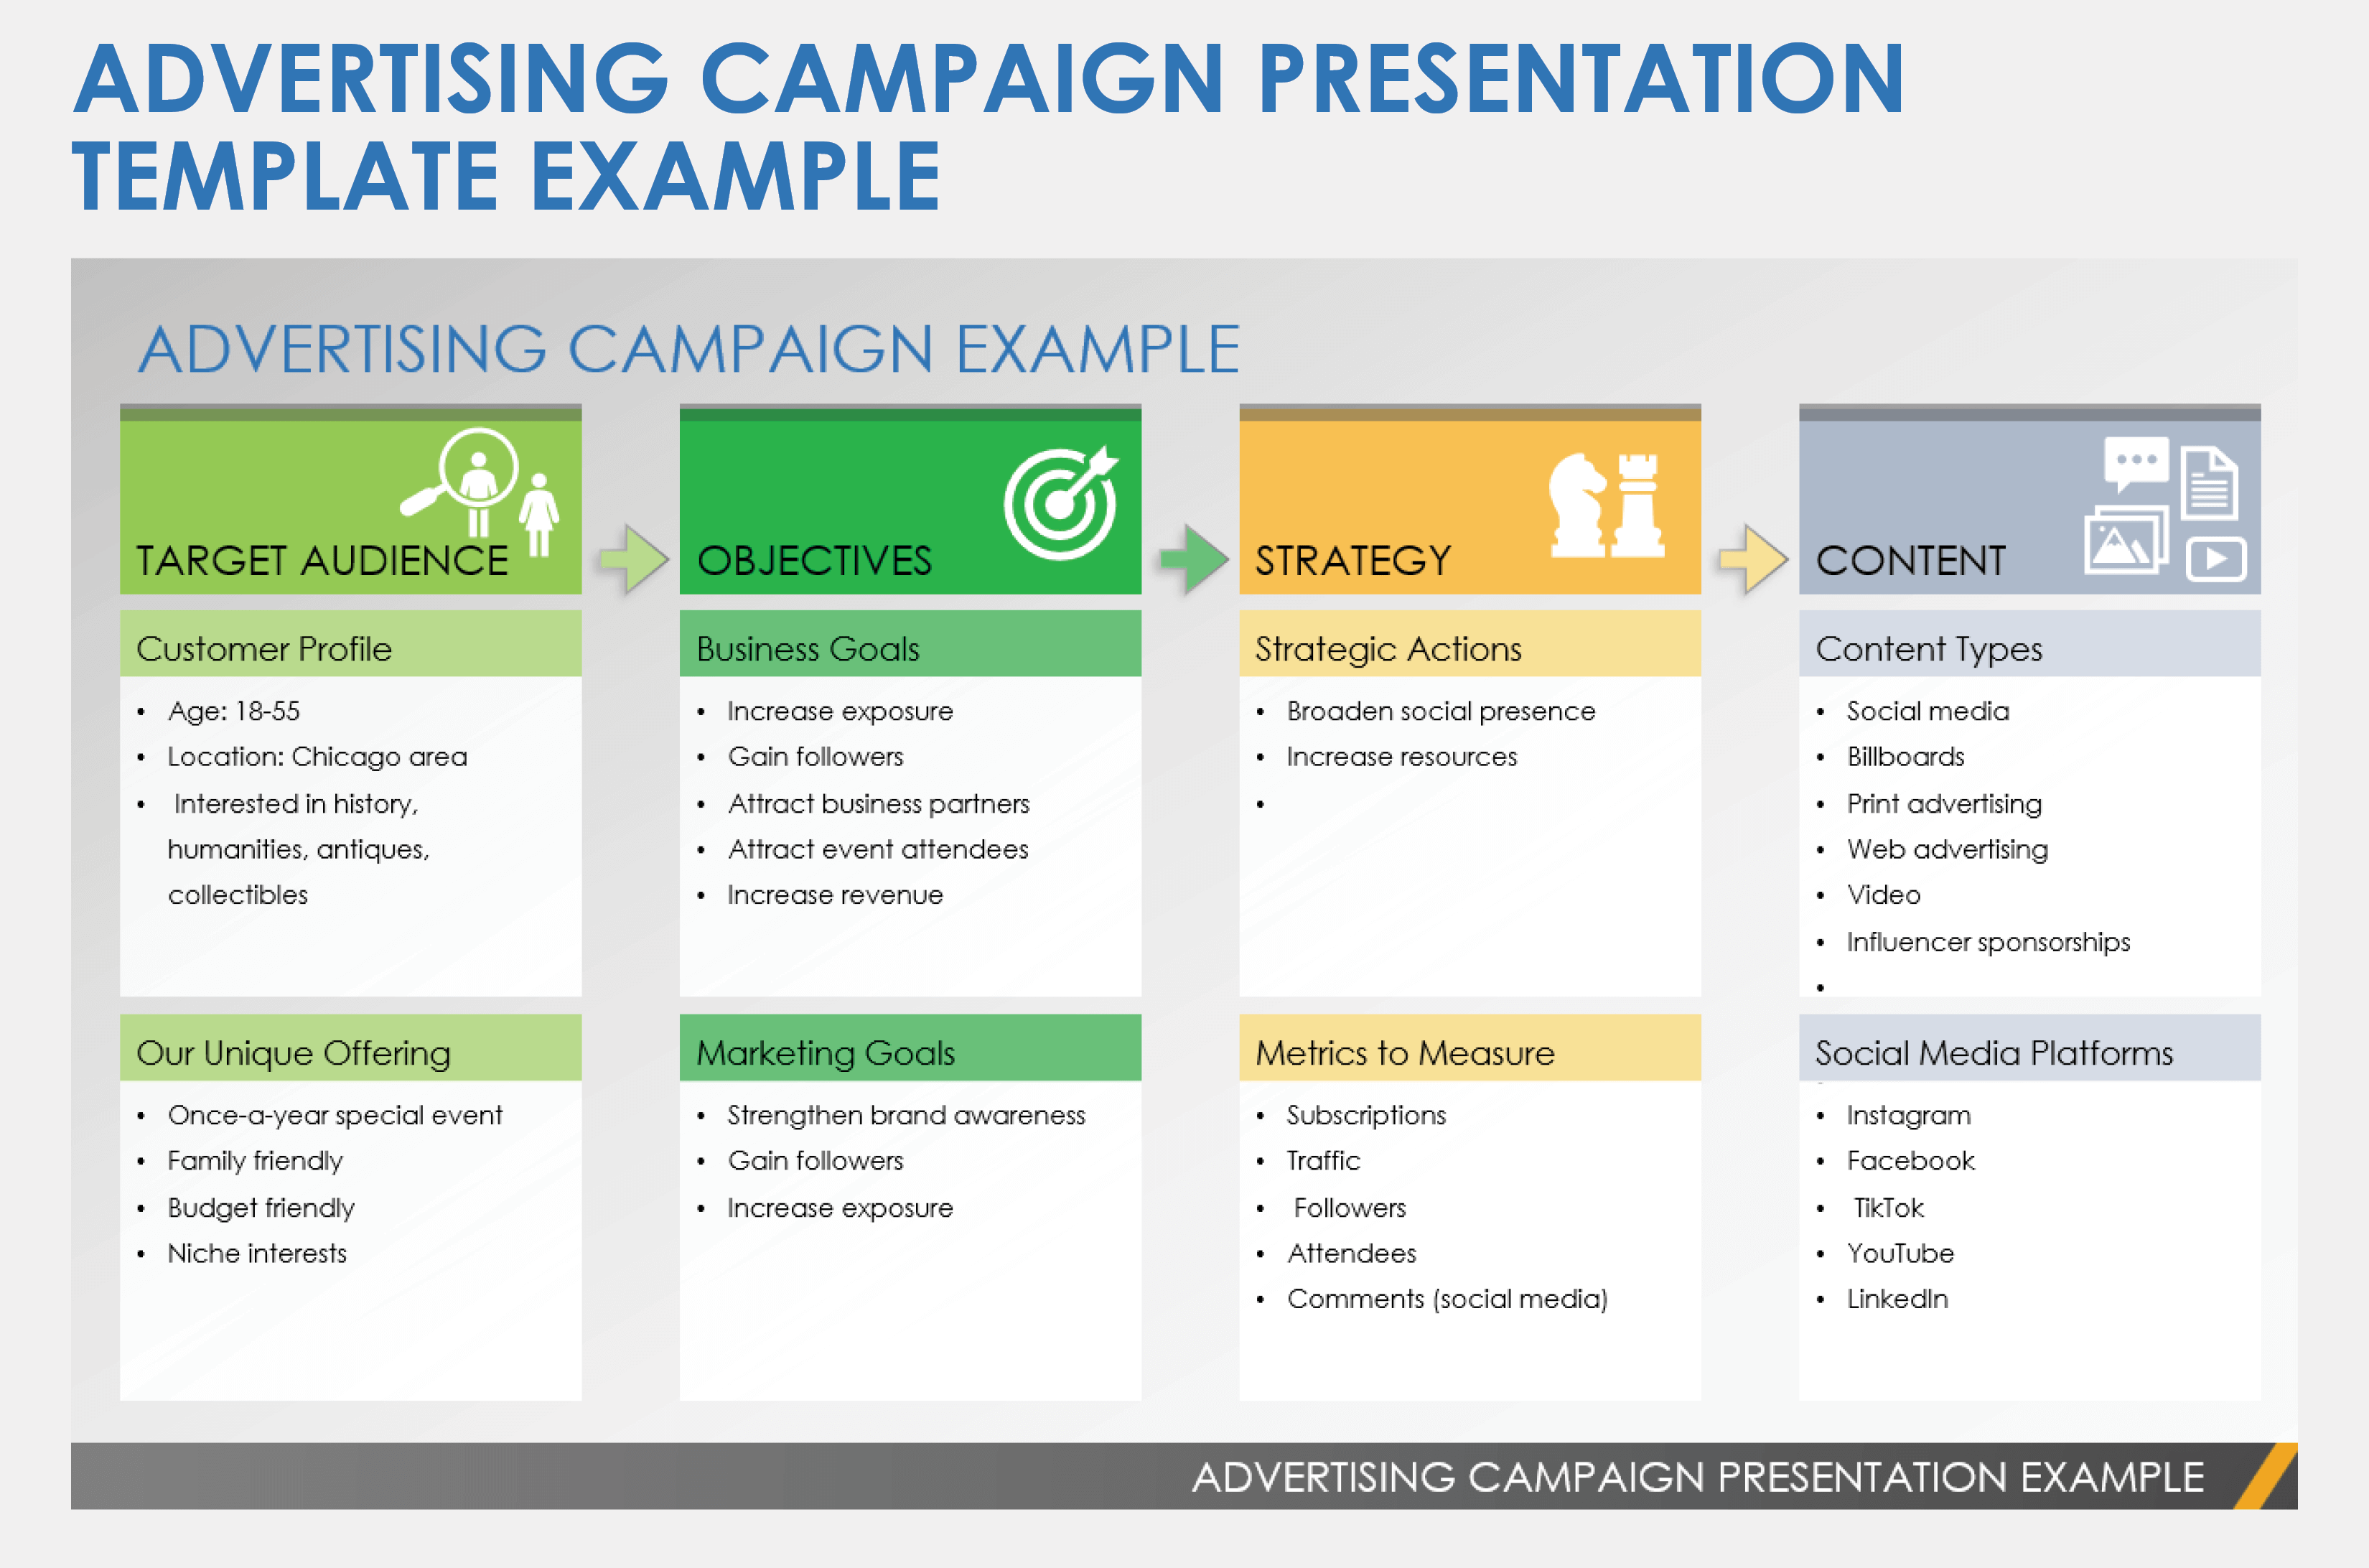 Advertising Campaign Presentation Example Template